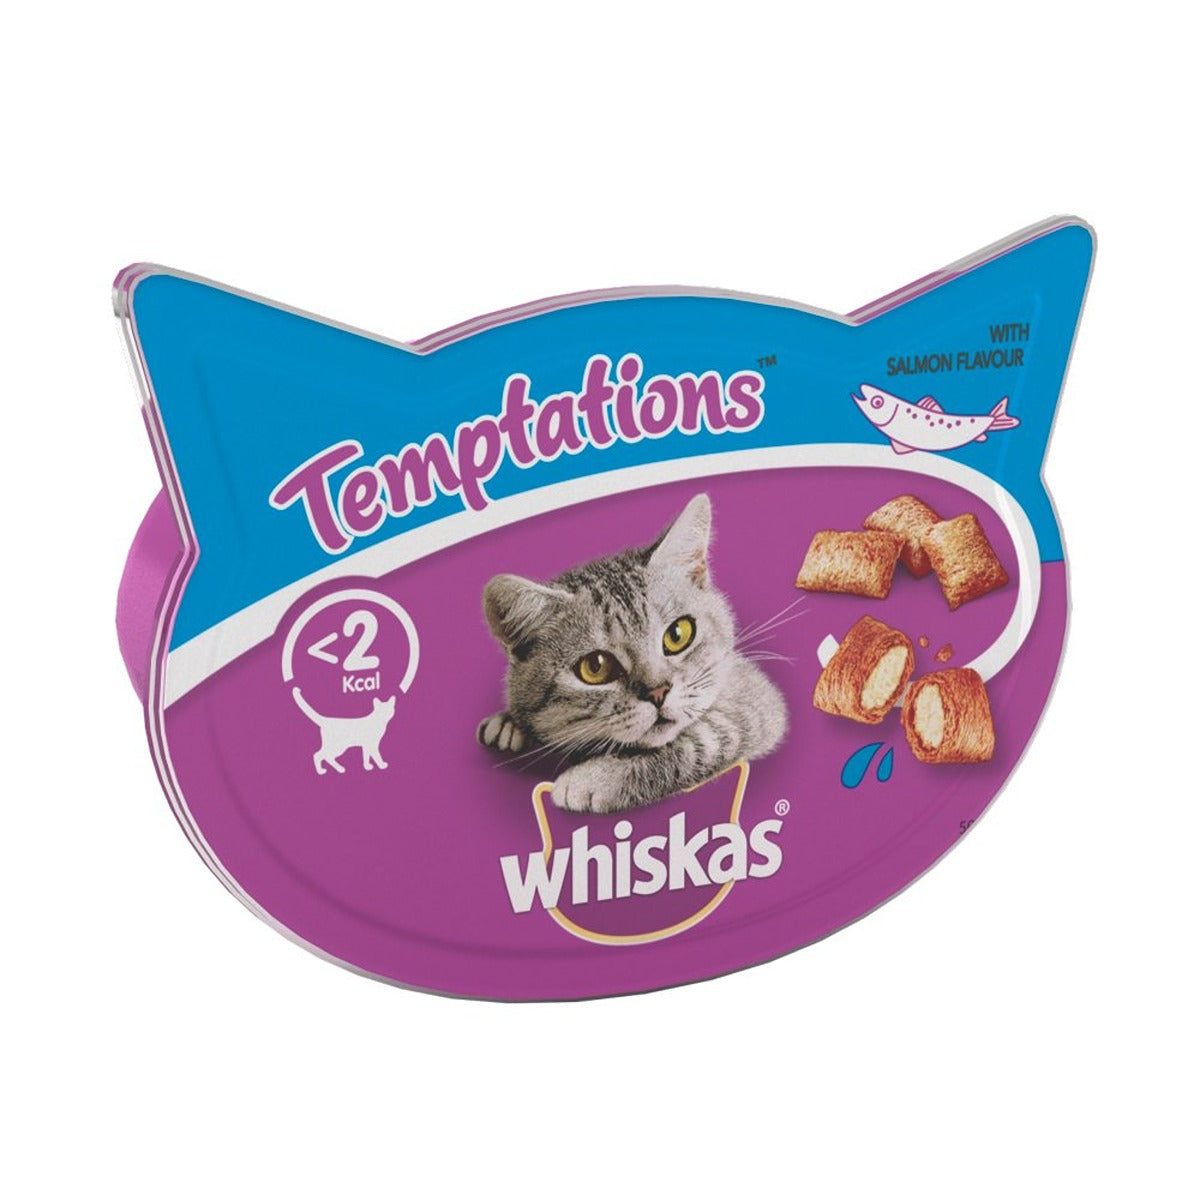 Whiskas - Temptations Adult Cat Treat Biscuits with Salmon - 60g - Continental Food Store